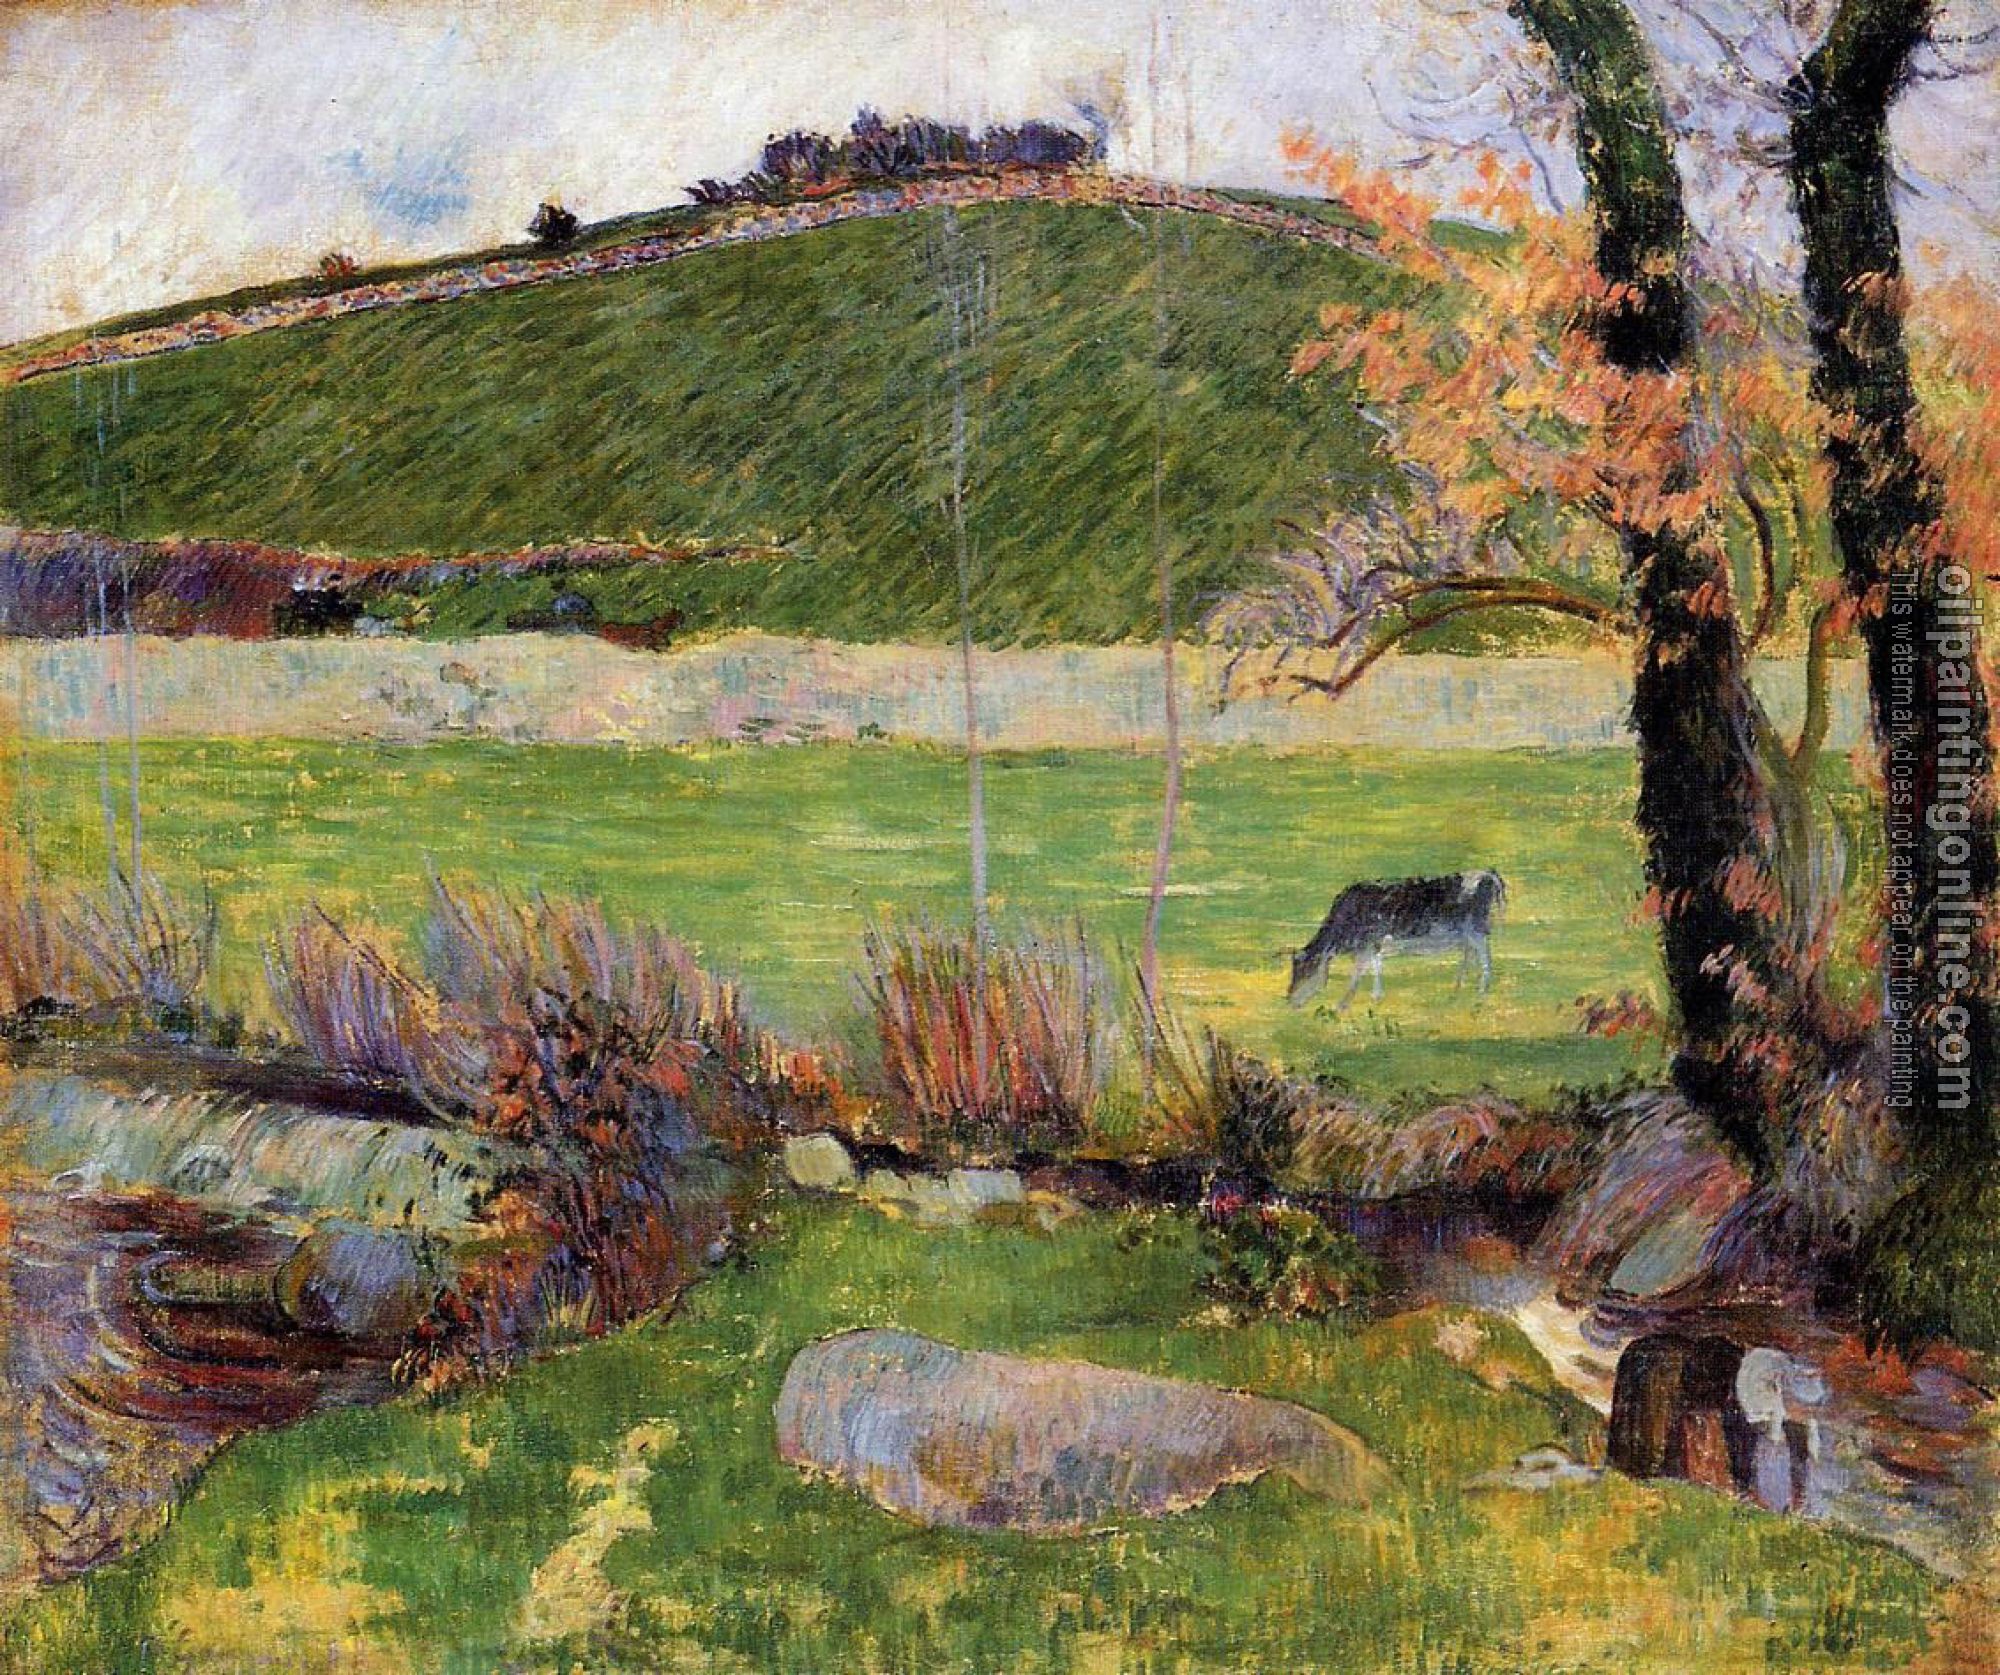 Gauguin, Paul - A Meadow on the Banks of the Aven